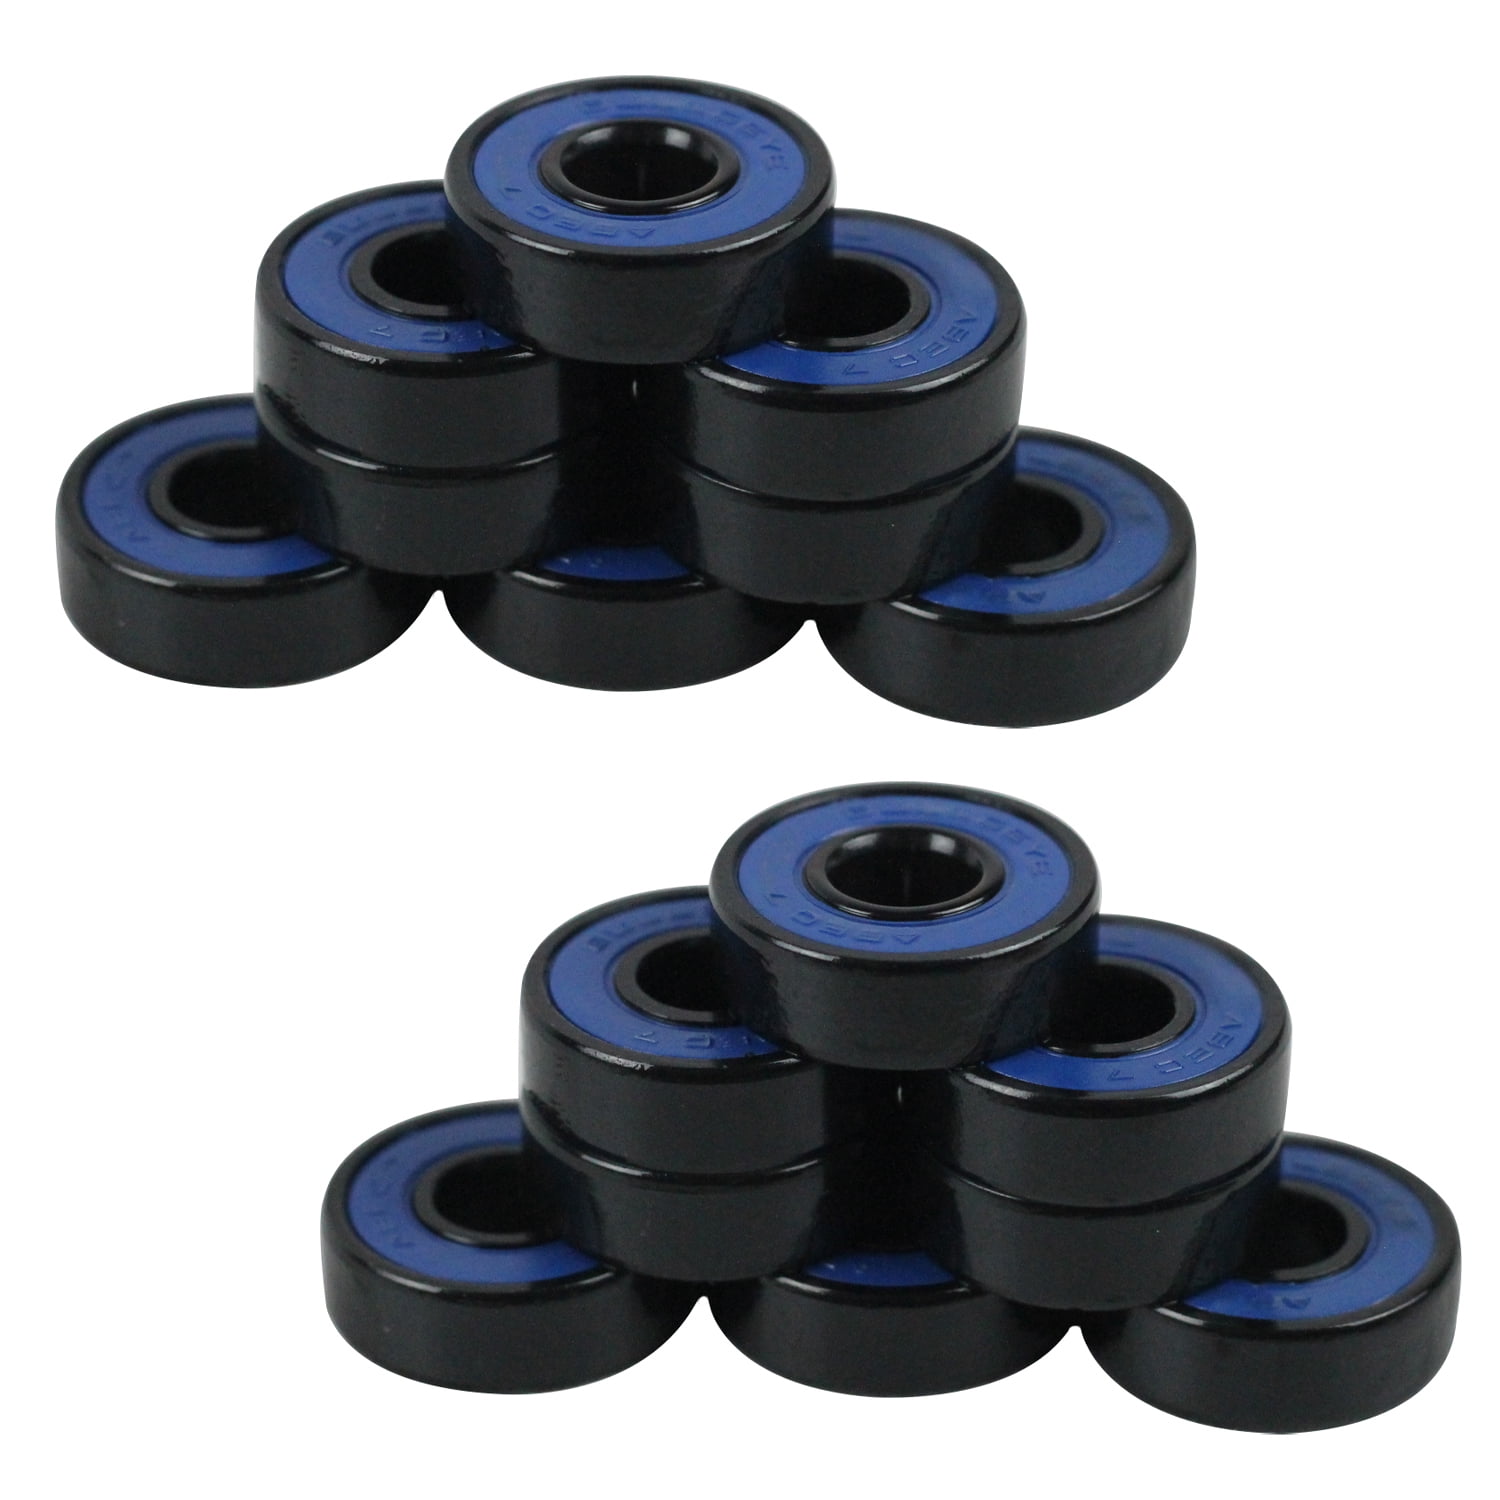 16 pieces  per lot Toned Skateboard Bearings Two FLASH ABEC-3 